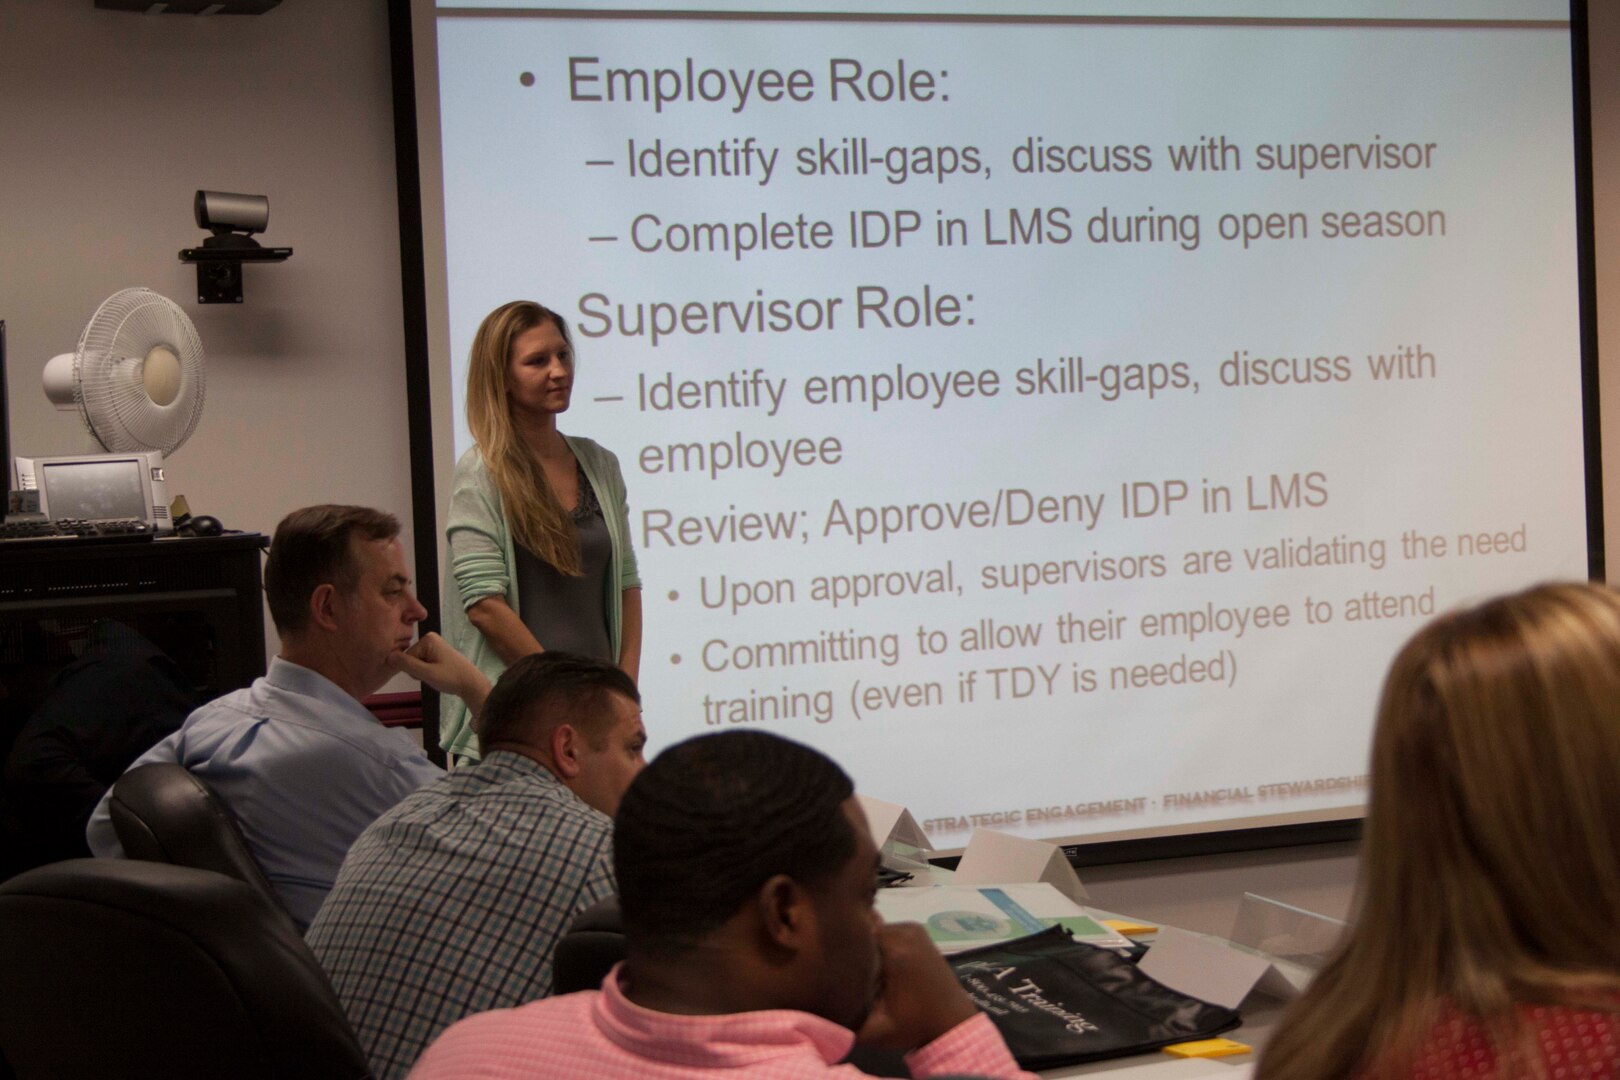 Jessica Bradshaw, DLA Distribution Forward Presence Training Team member, provides a live training session on the Learning Management System and Individual Development Plans for training coordinators at DLA Distribution. 